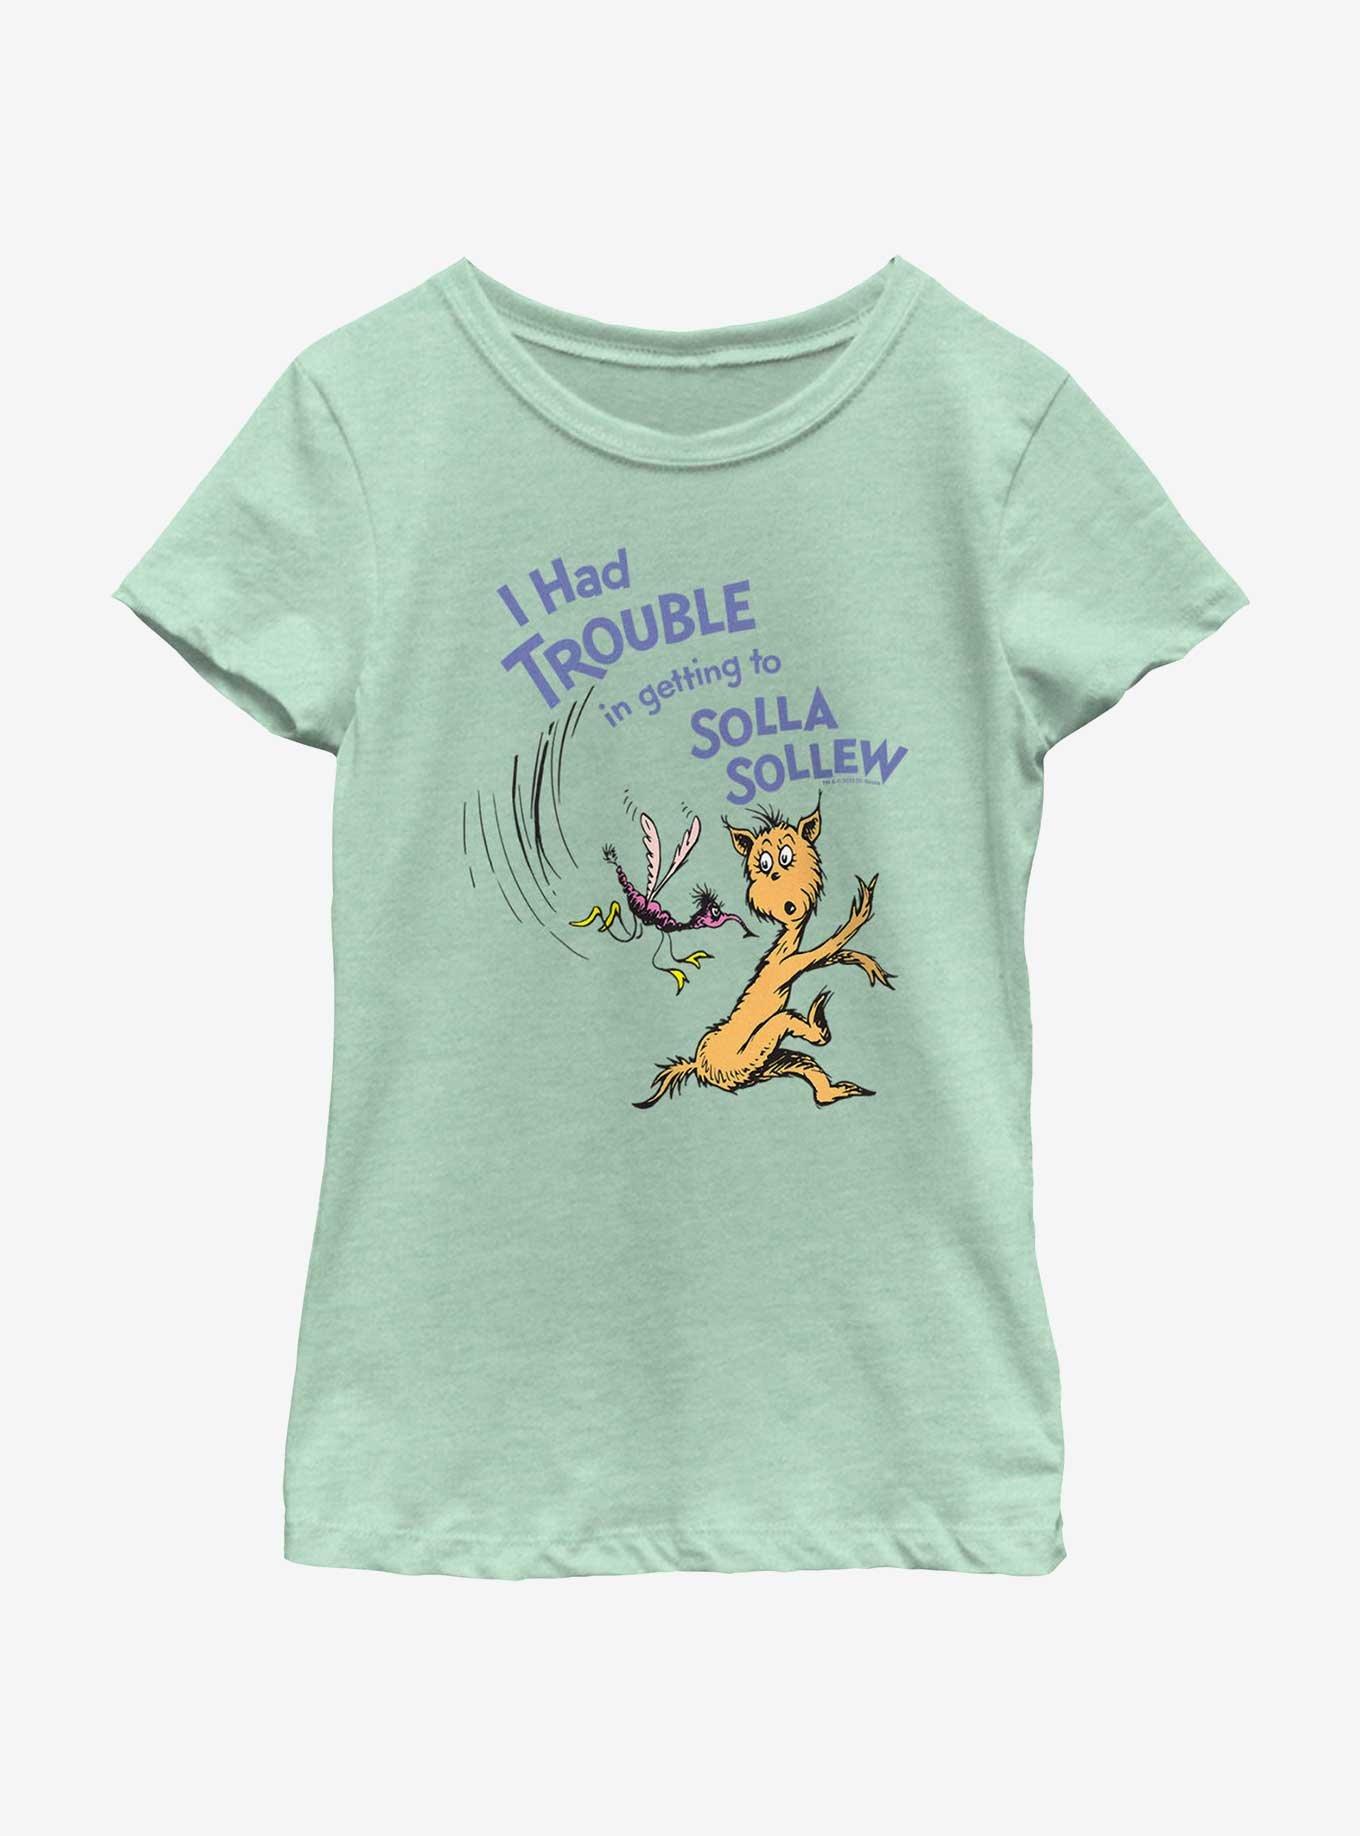 Dr. Seuss's I Had Trouble Getting Into Solla Sollew Trouble Youth Girls T-Shirt, MINT, hi-res